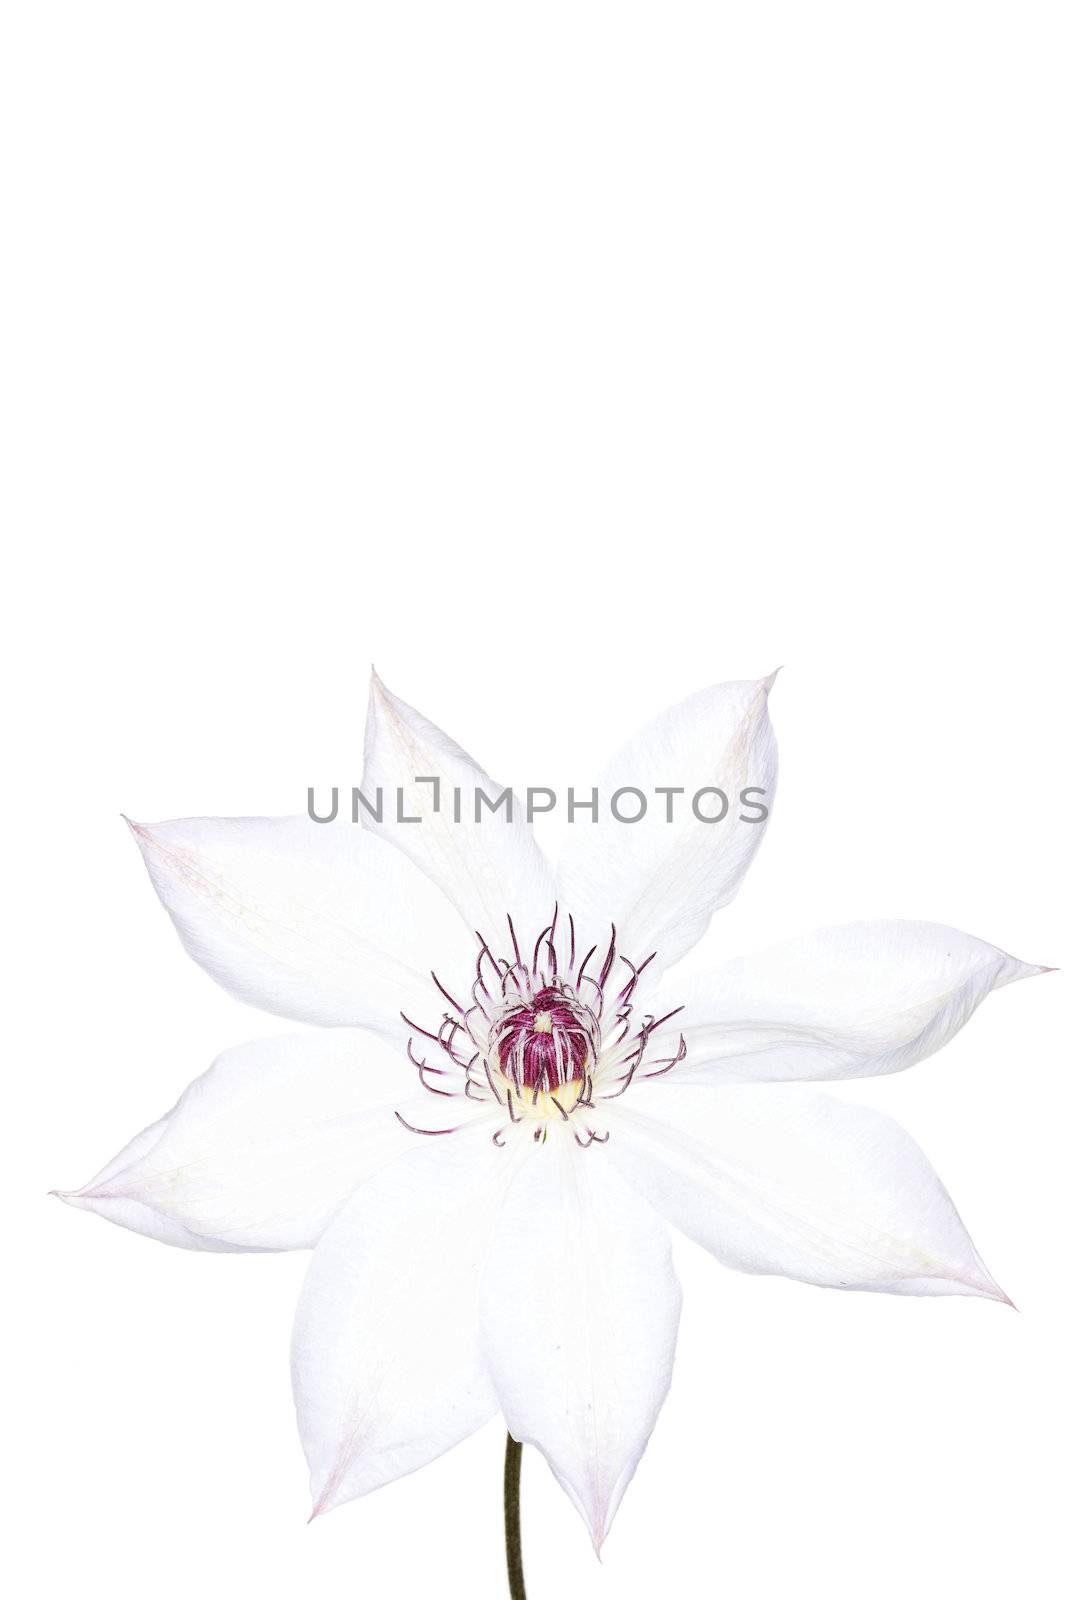 White Clematis Snow Queen close up